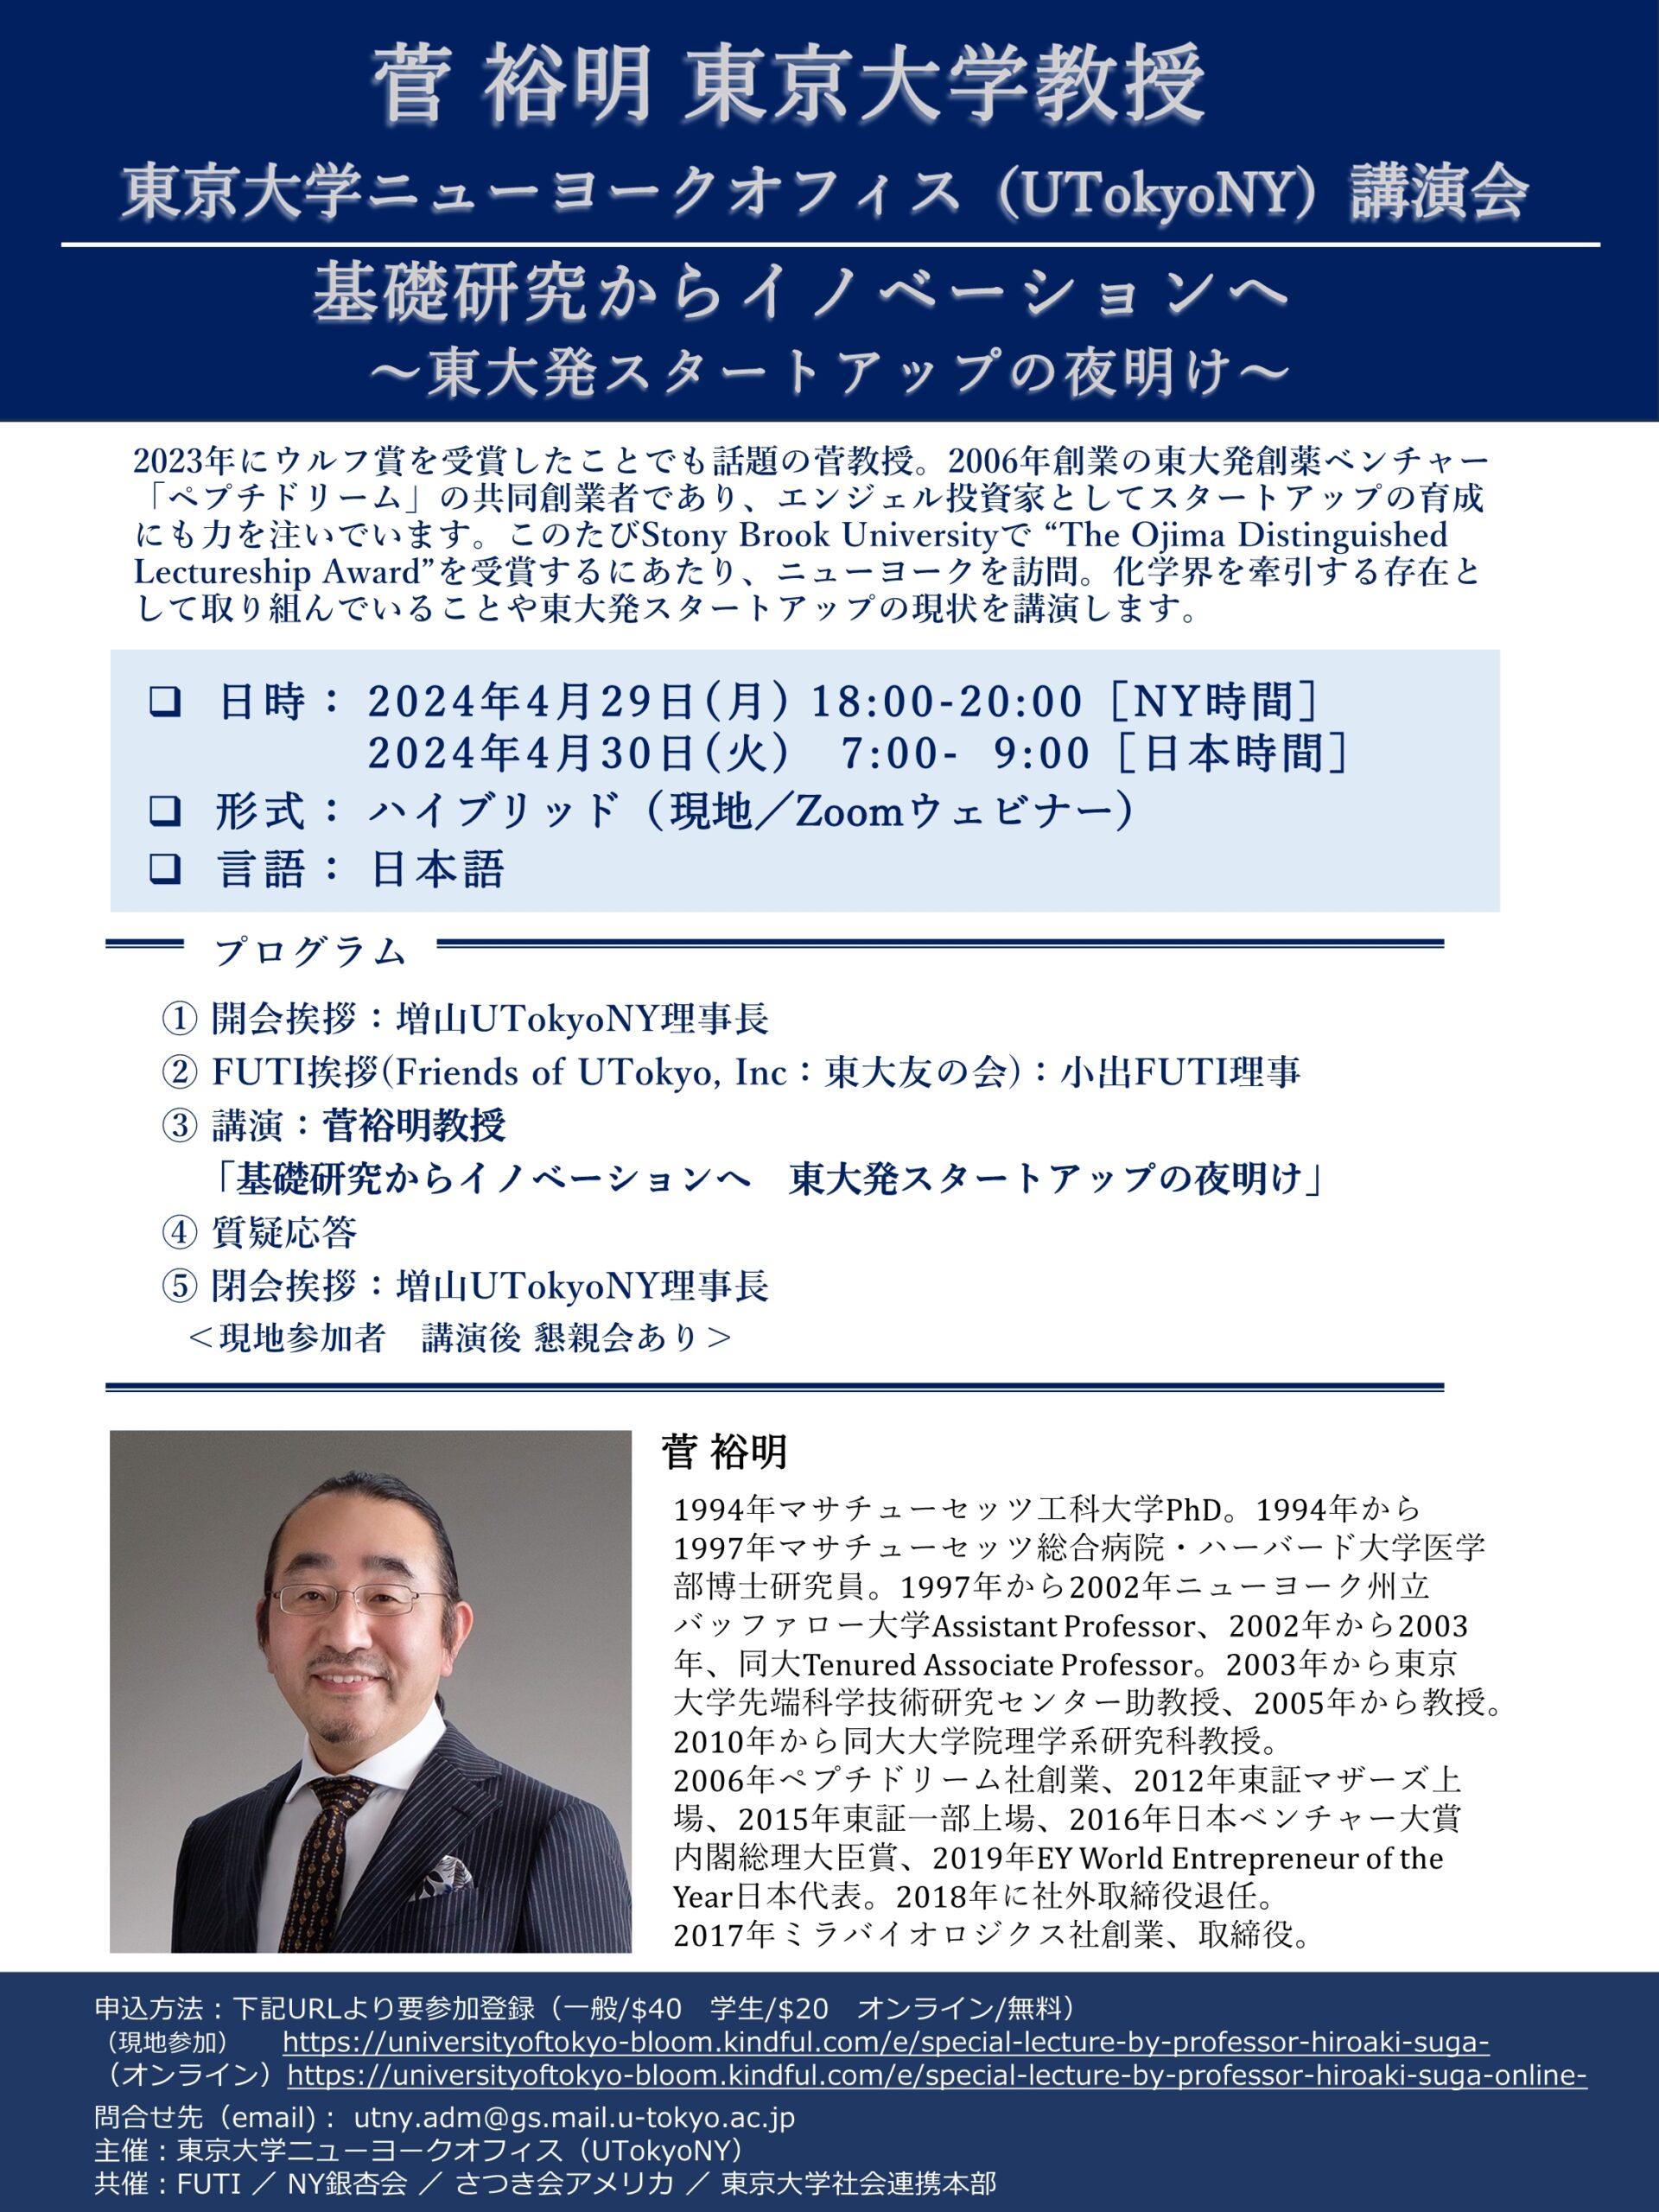 UTokyoNY Lecture “From Basic Research to Innovation, the Dawn of Startups from the University of Tokyo”